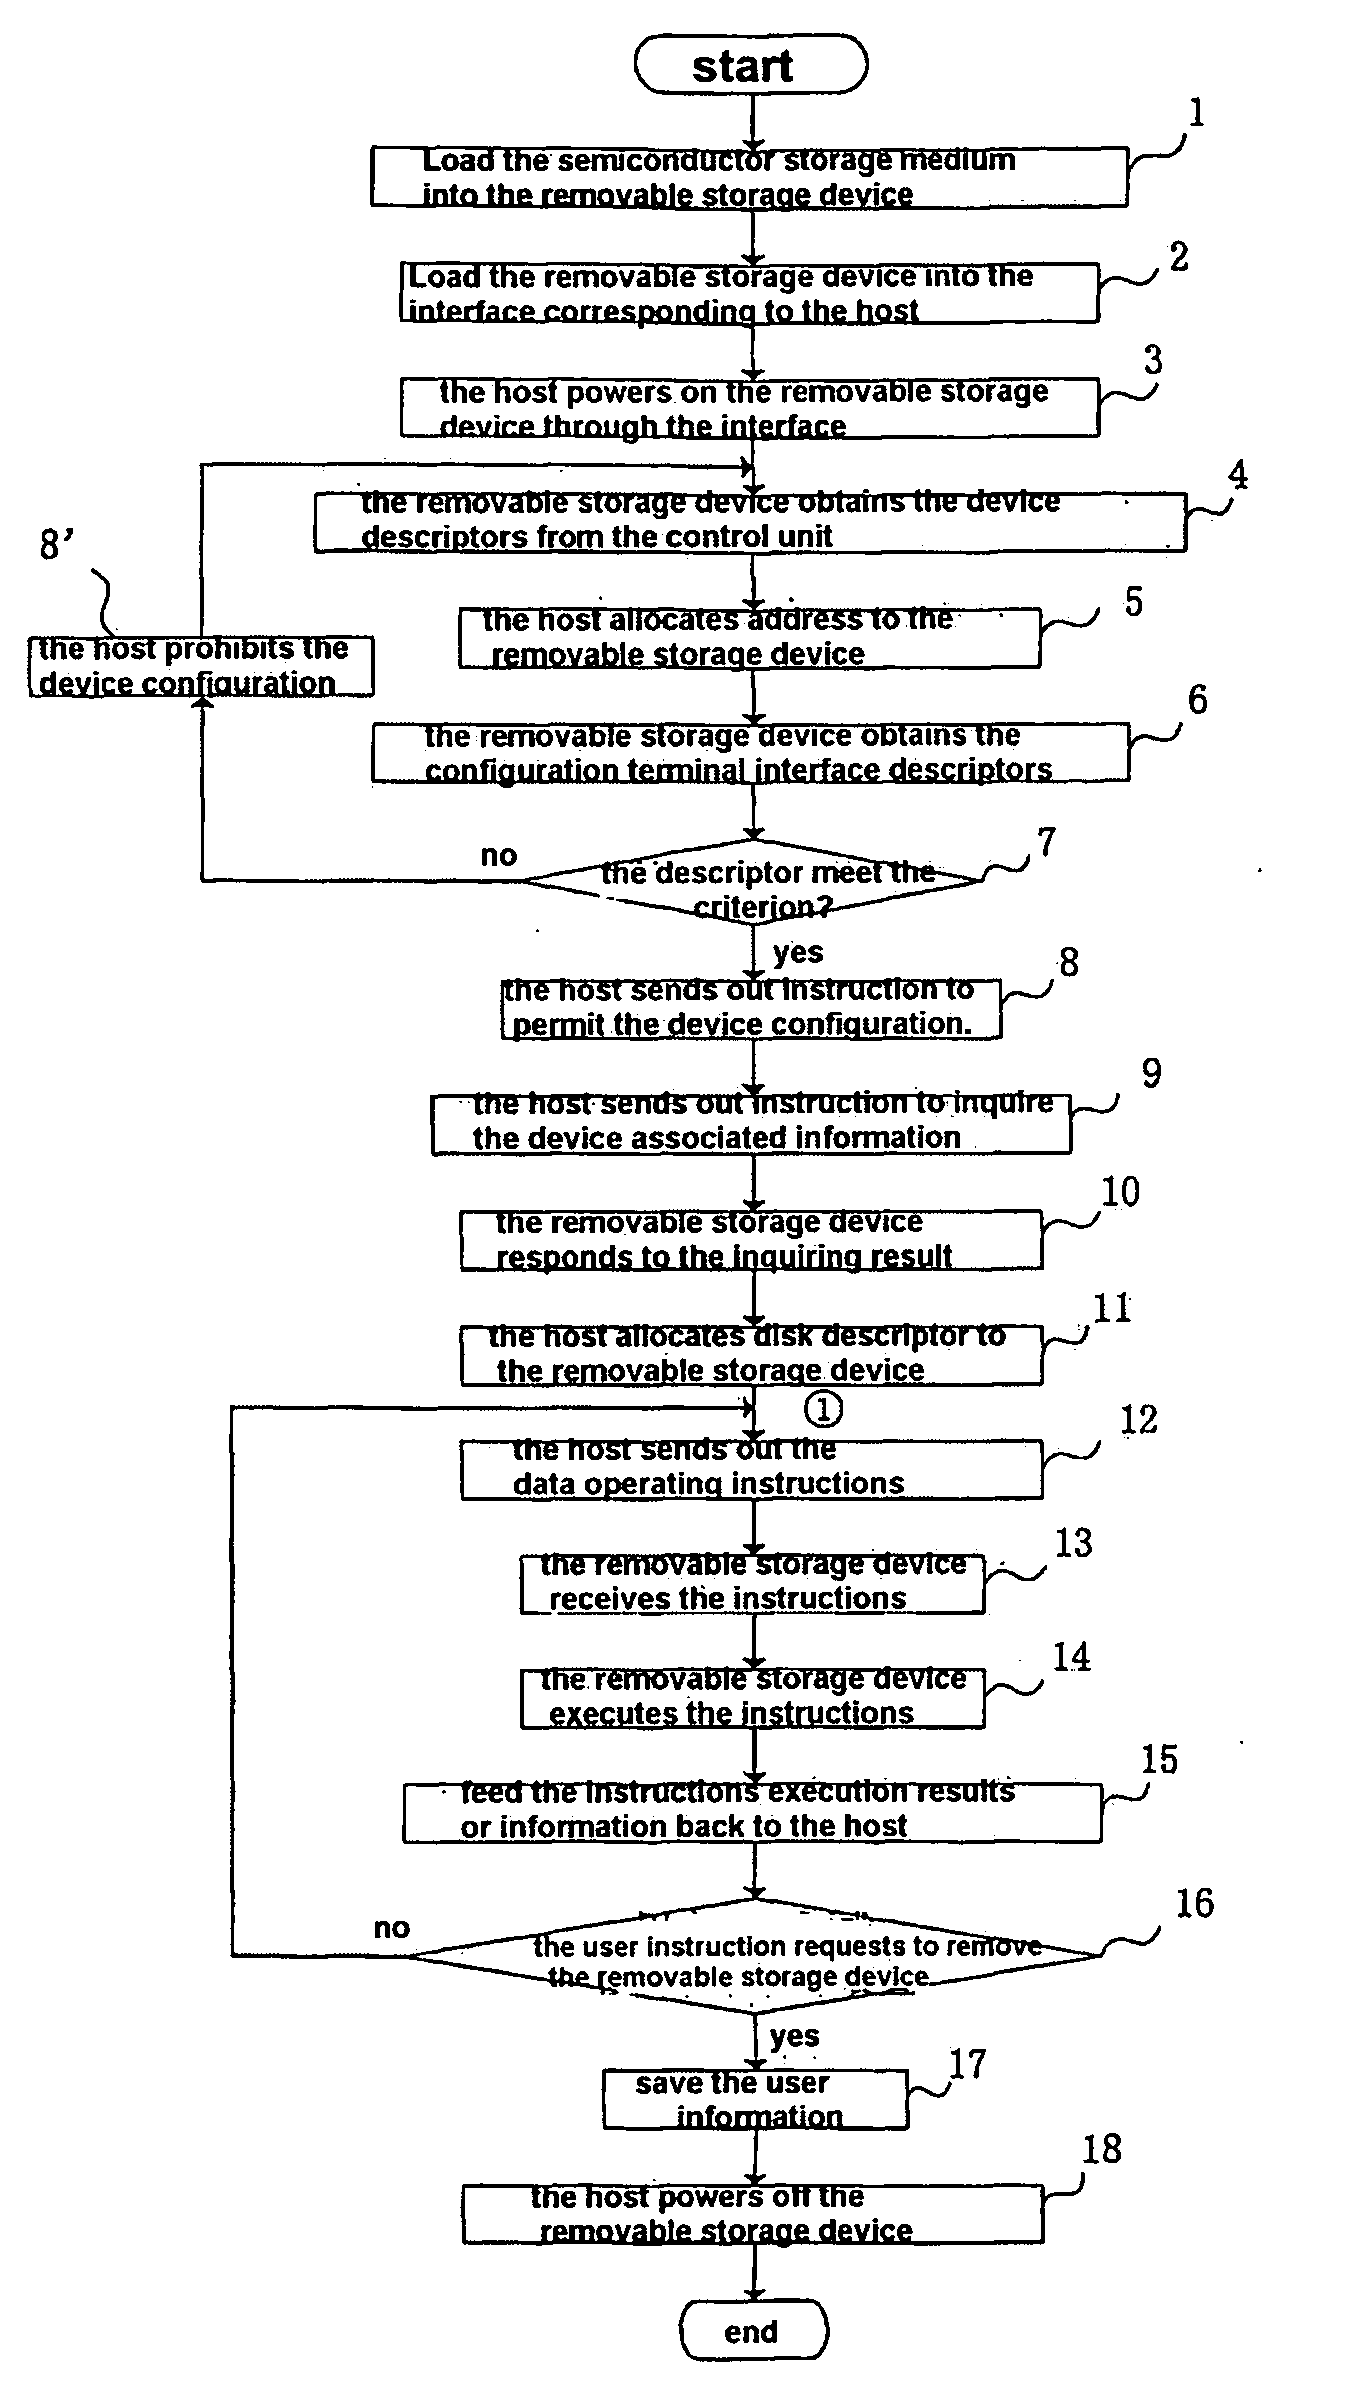 Data Managing Method in a Removable Storage Device